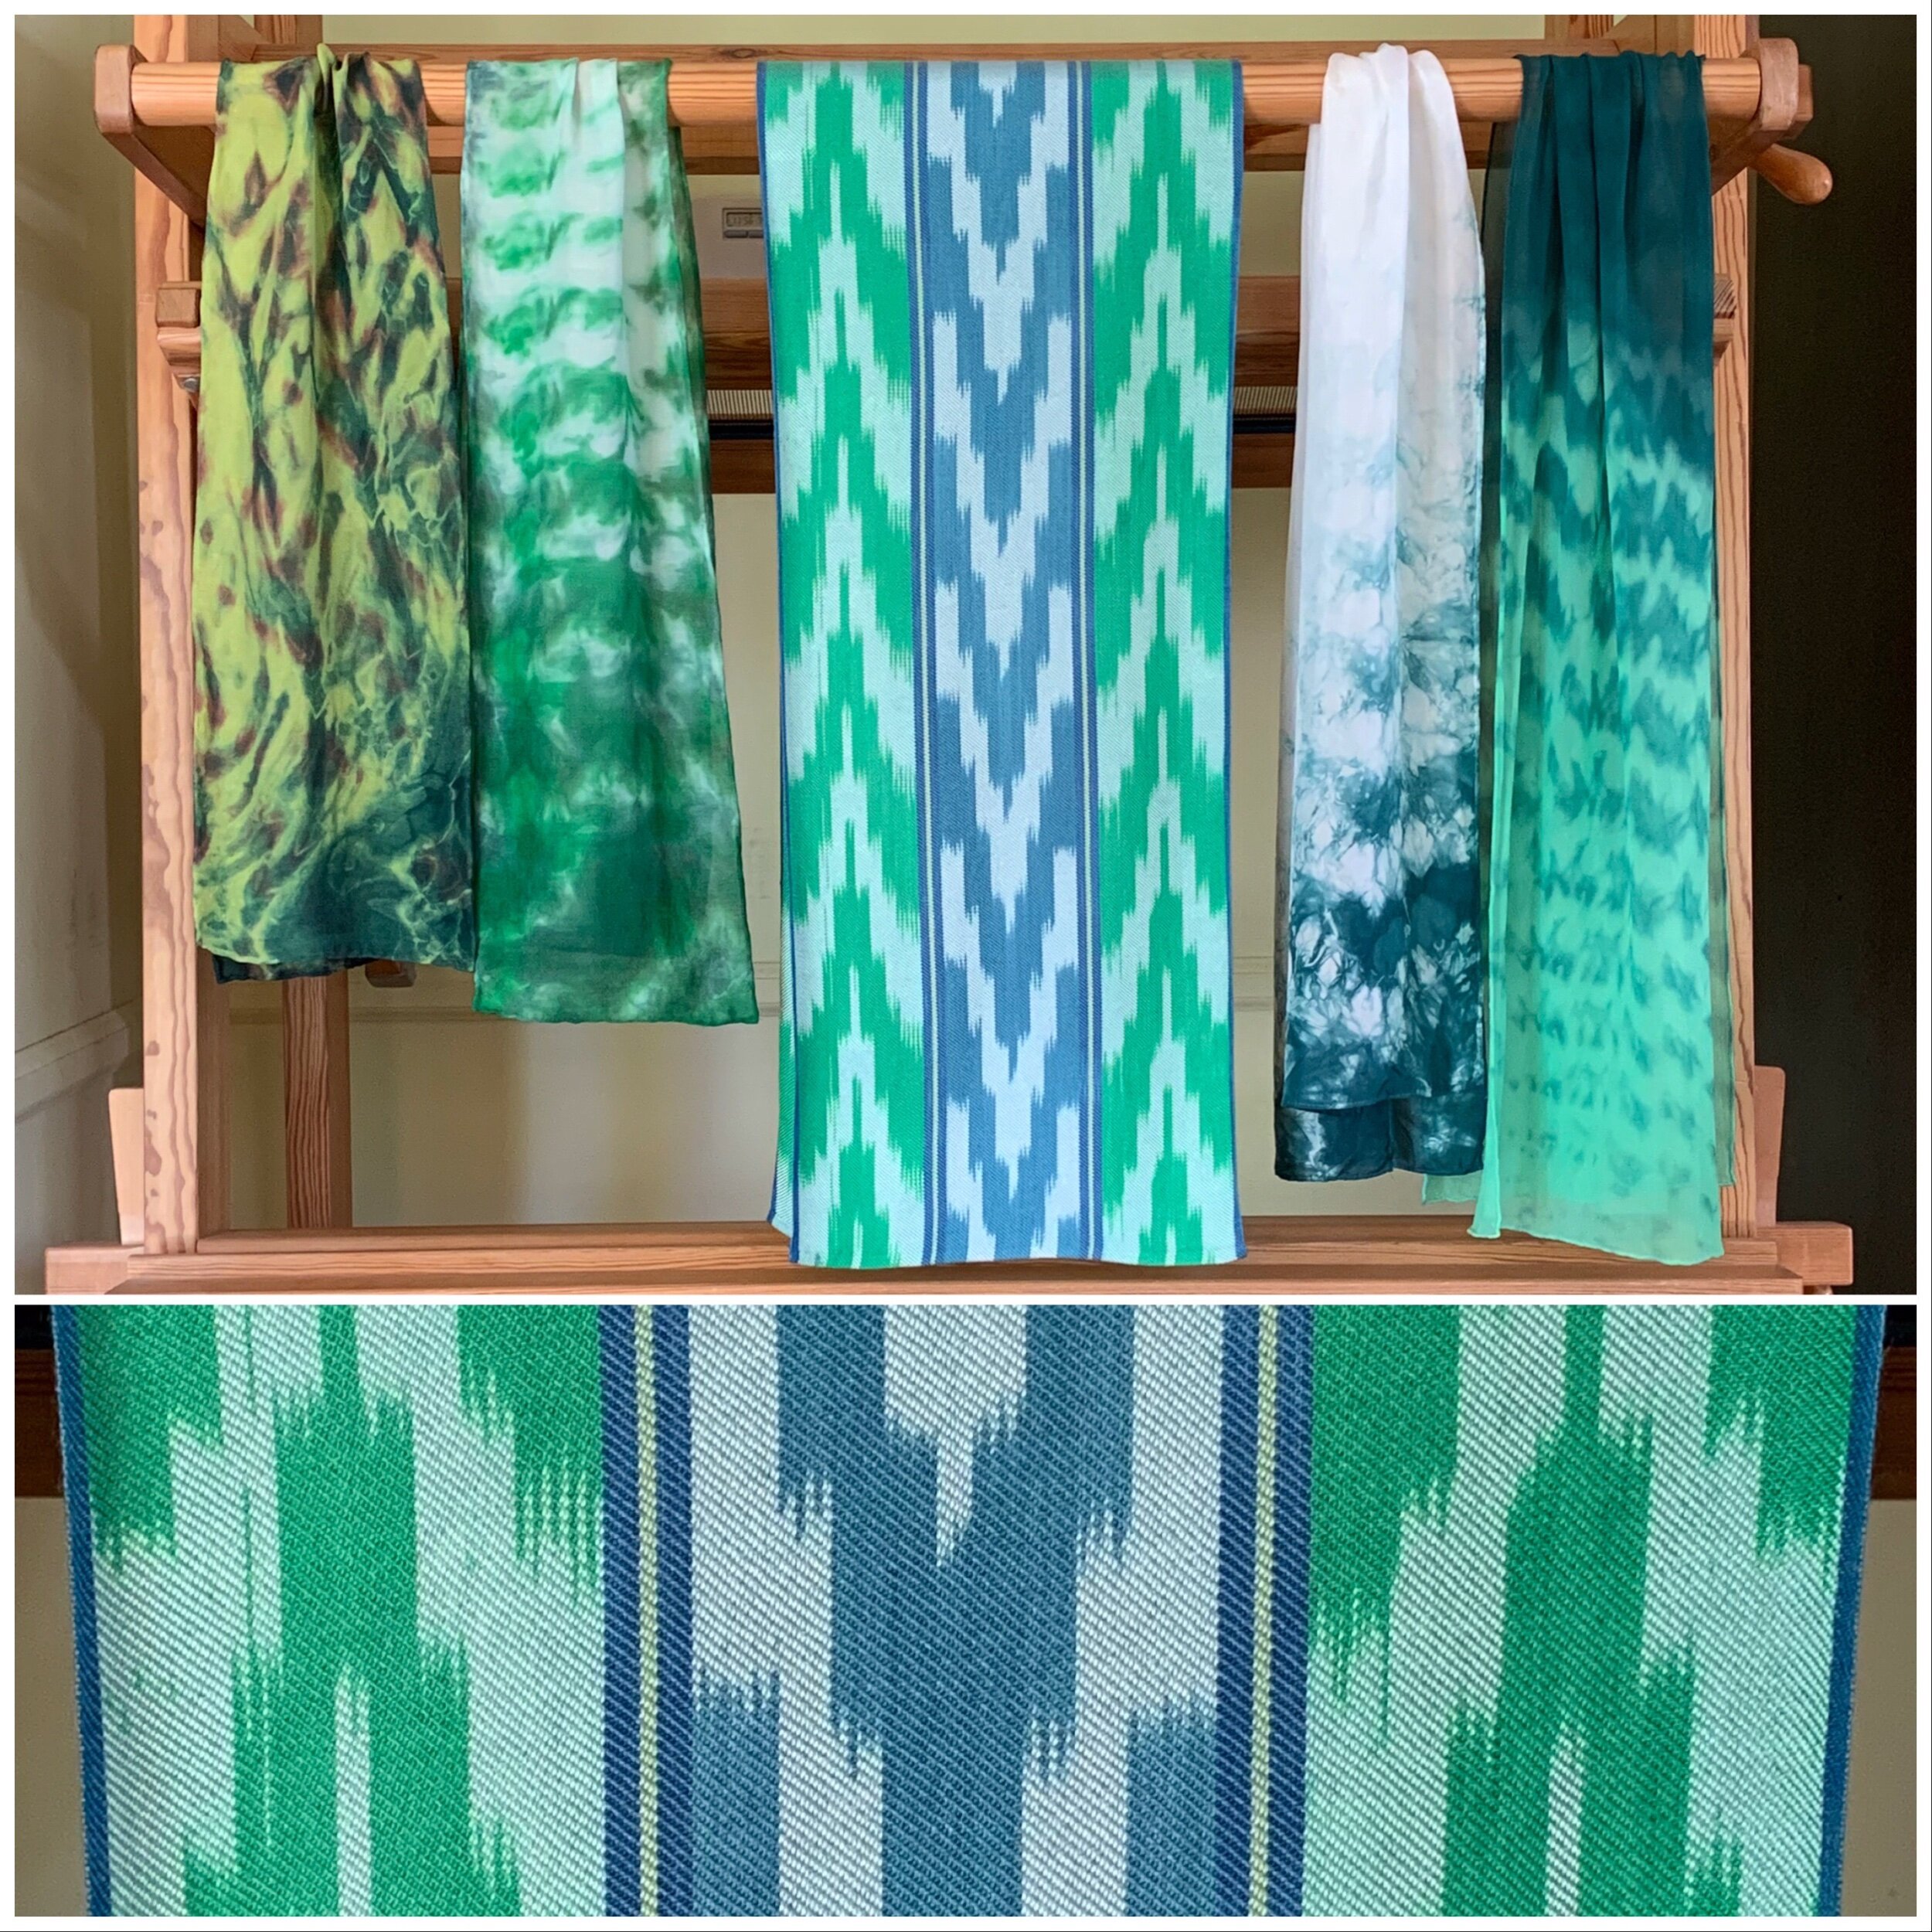 Beth Rentsch - ikat dyed/woven scarf & Shibori dyed scarves